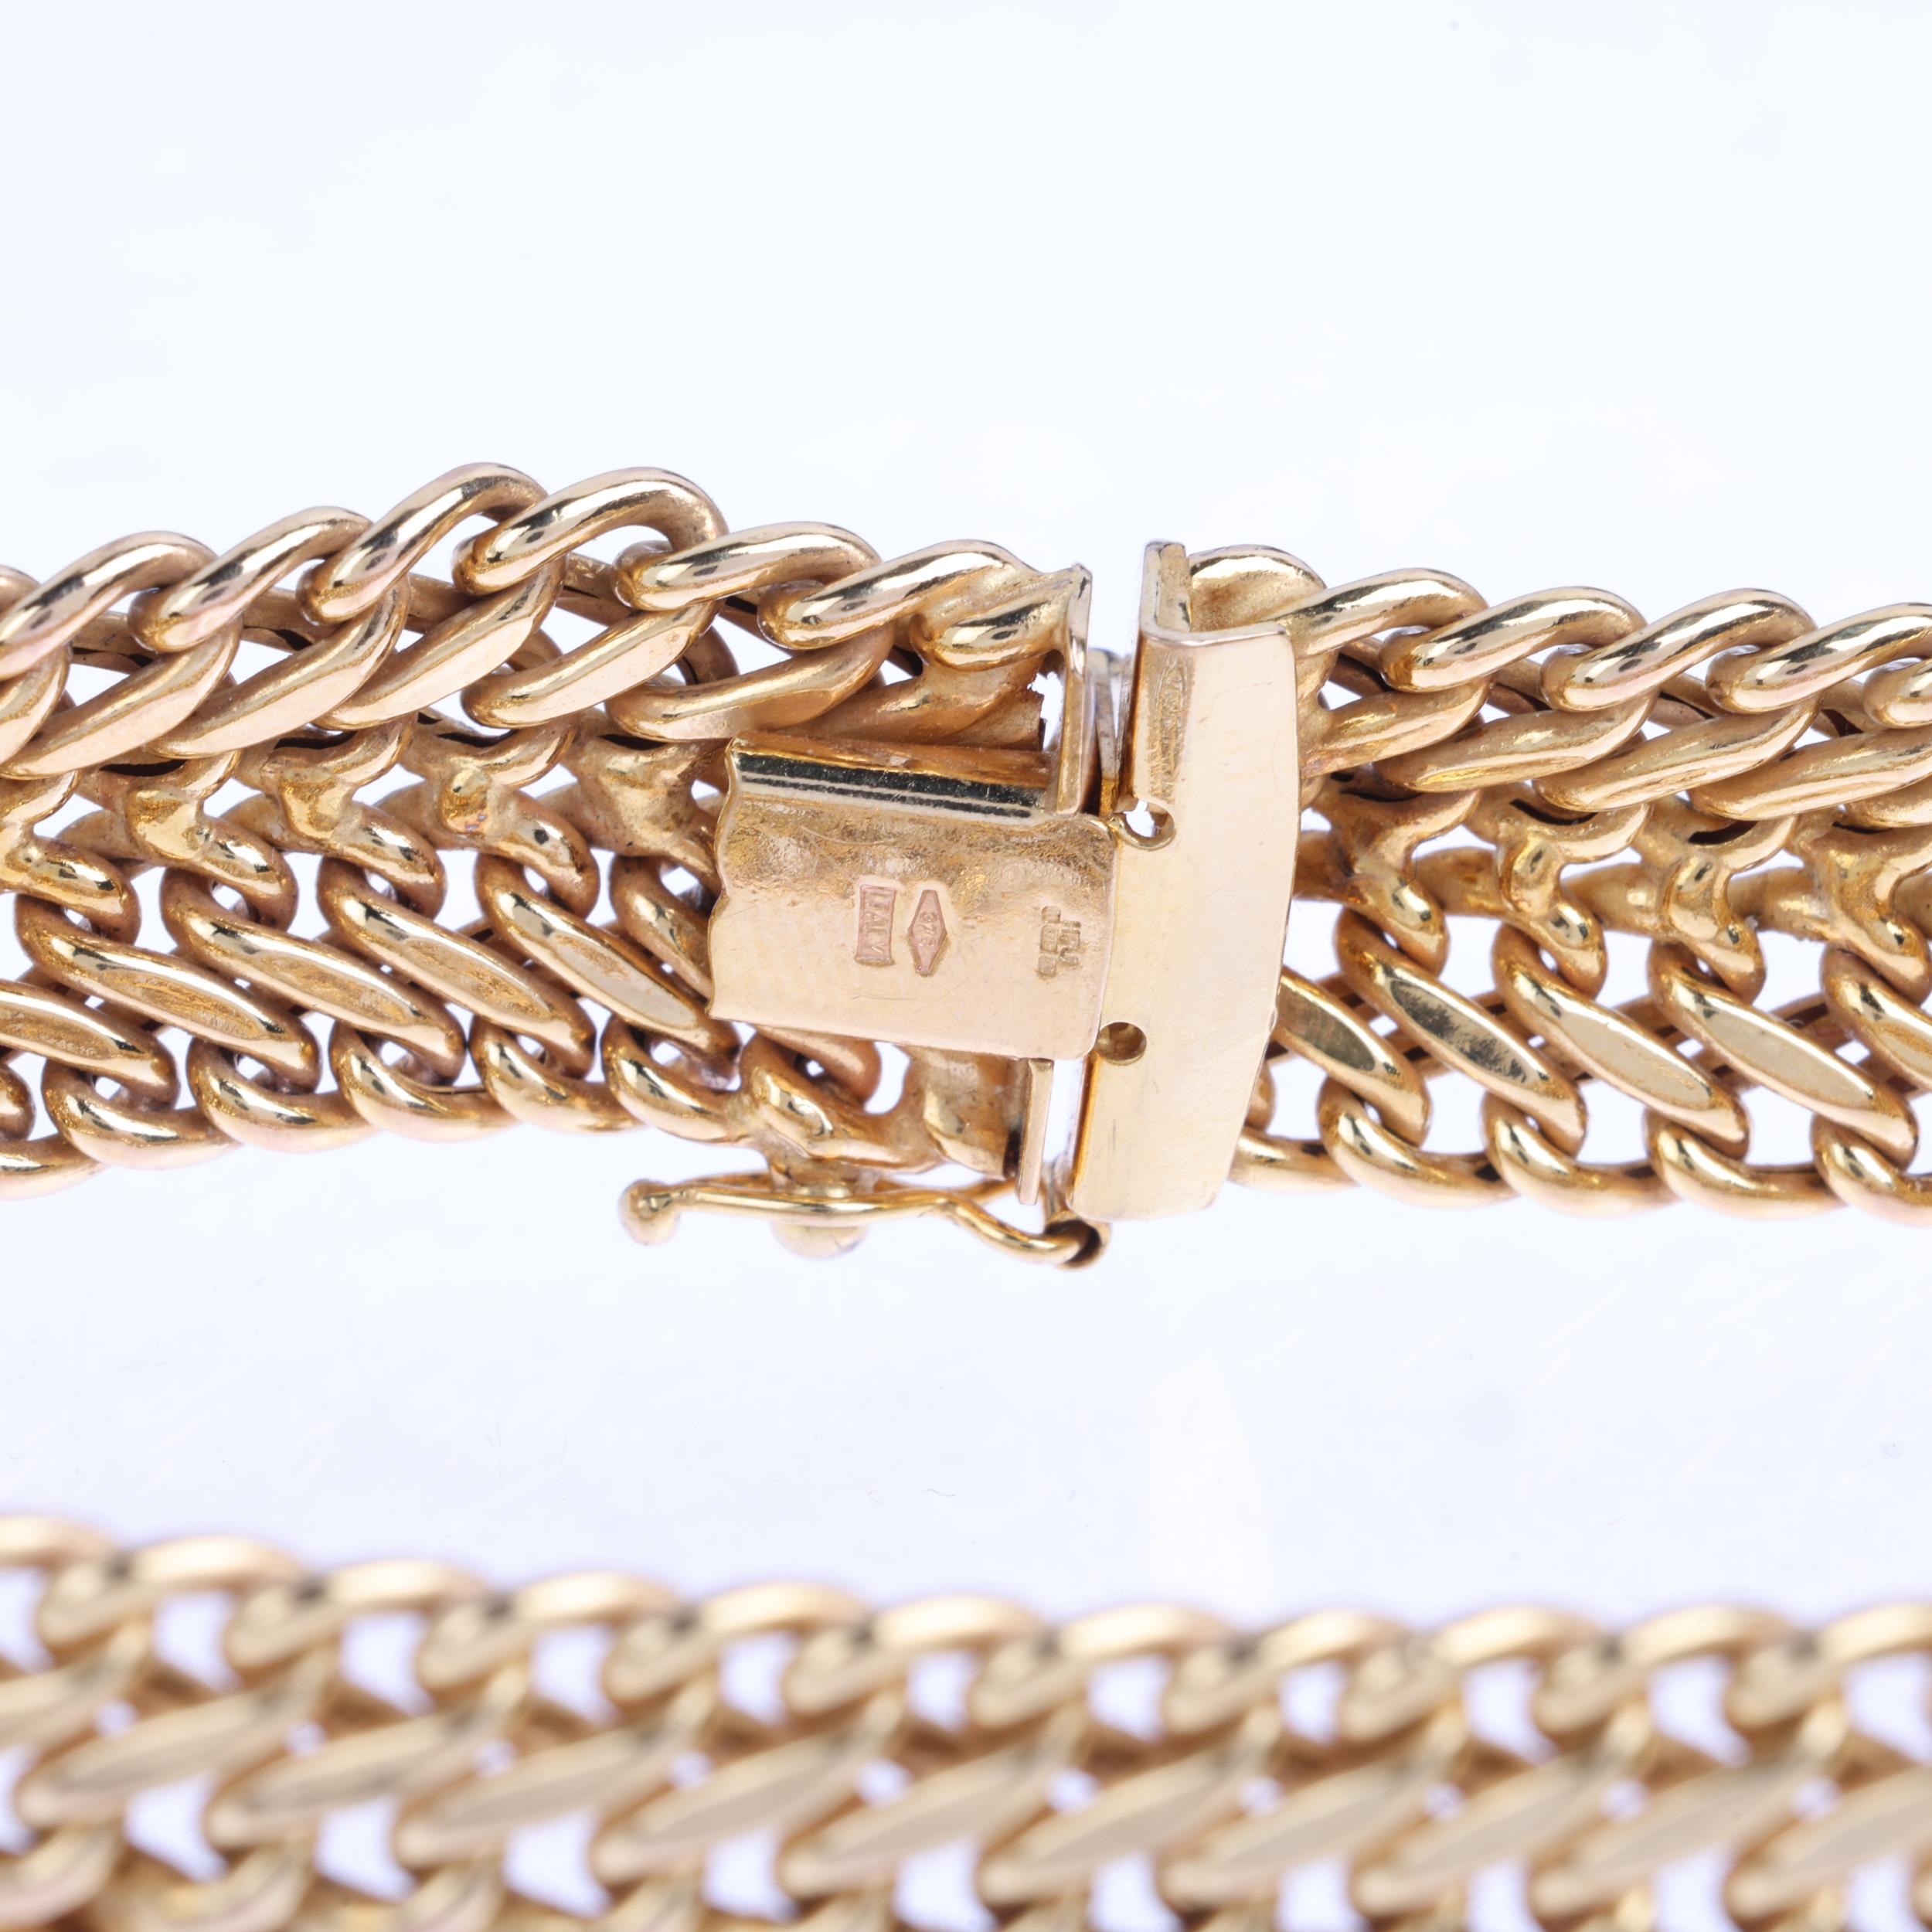 An Italian 9ct gold multiple hollow curb link chain bracelet, band width 14.9mm, 19cm, 16.9g - Image 2 of 4